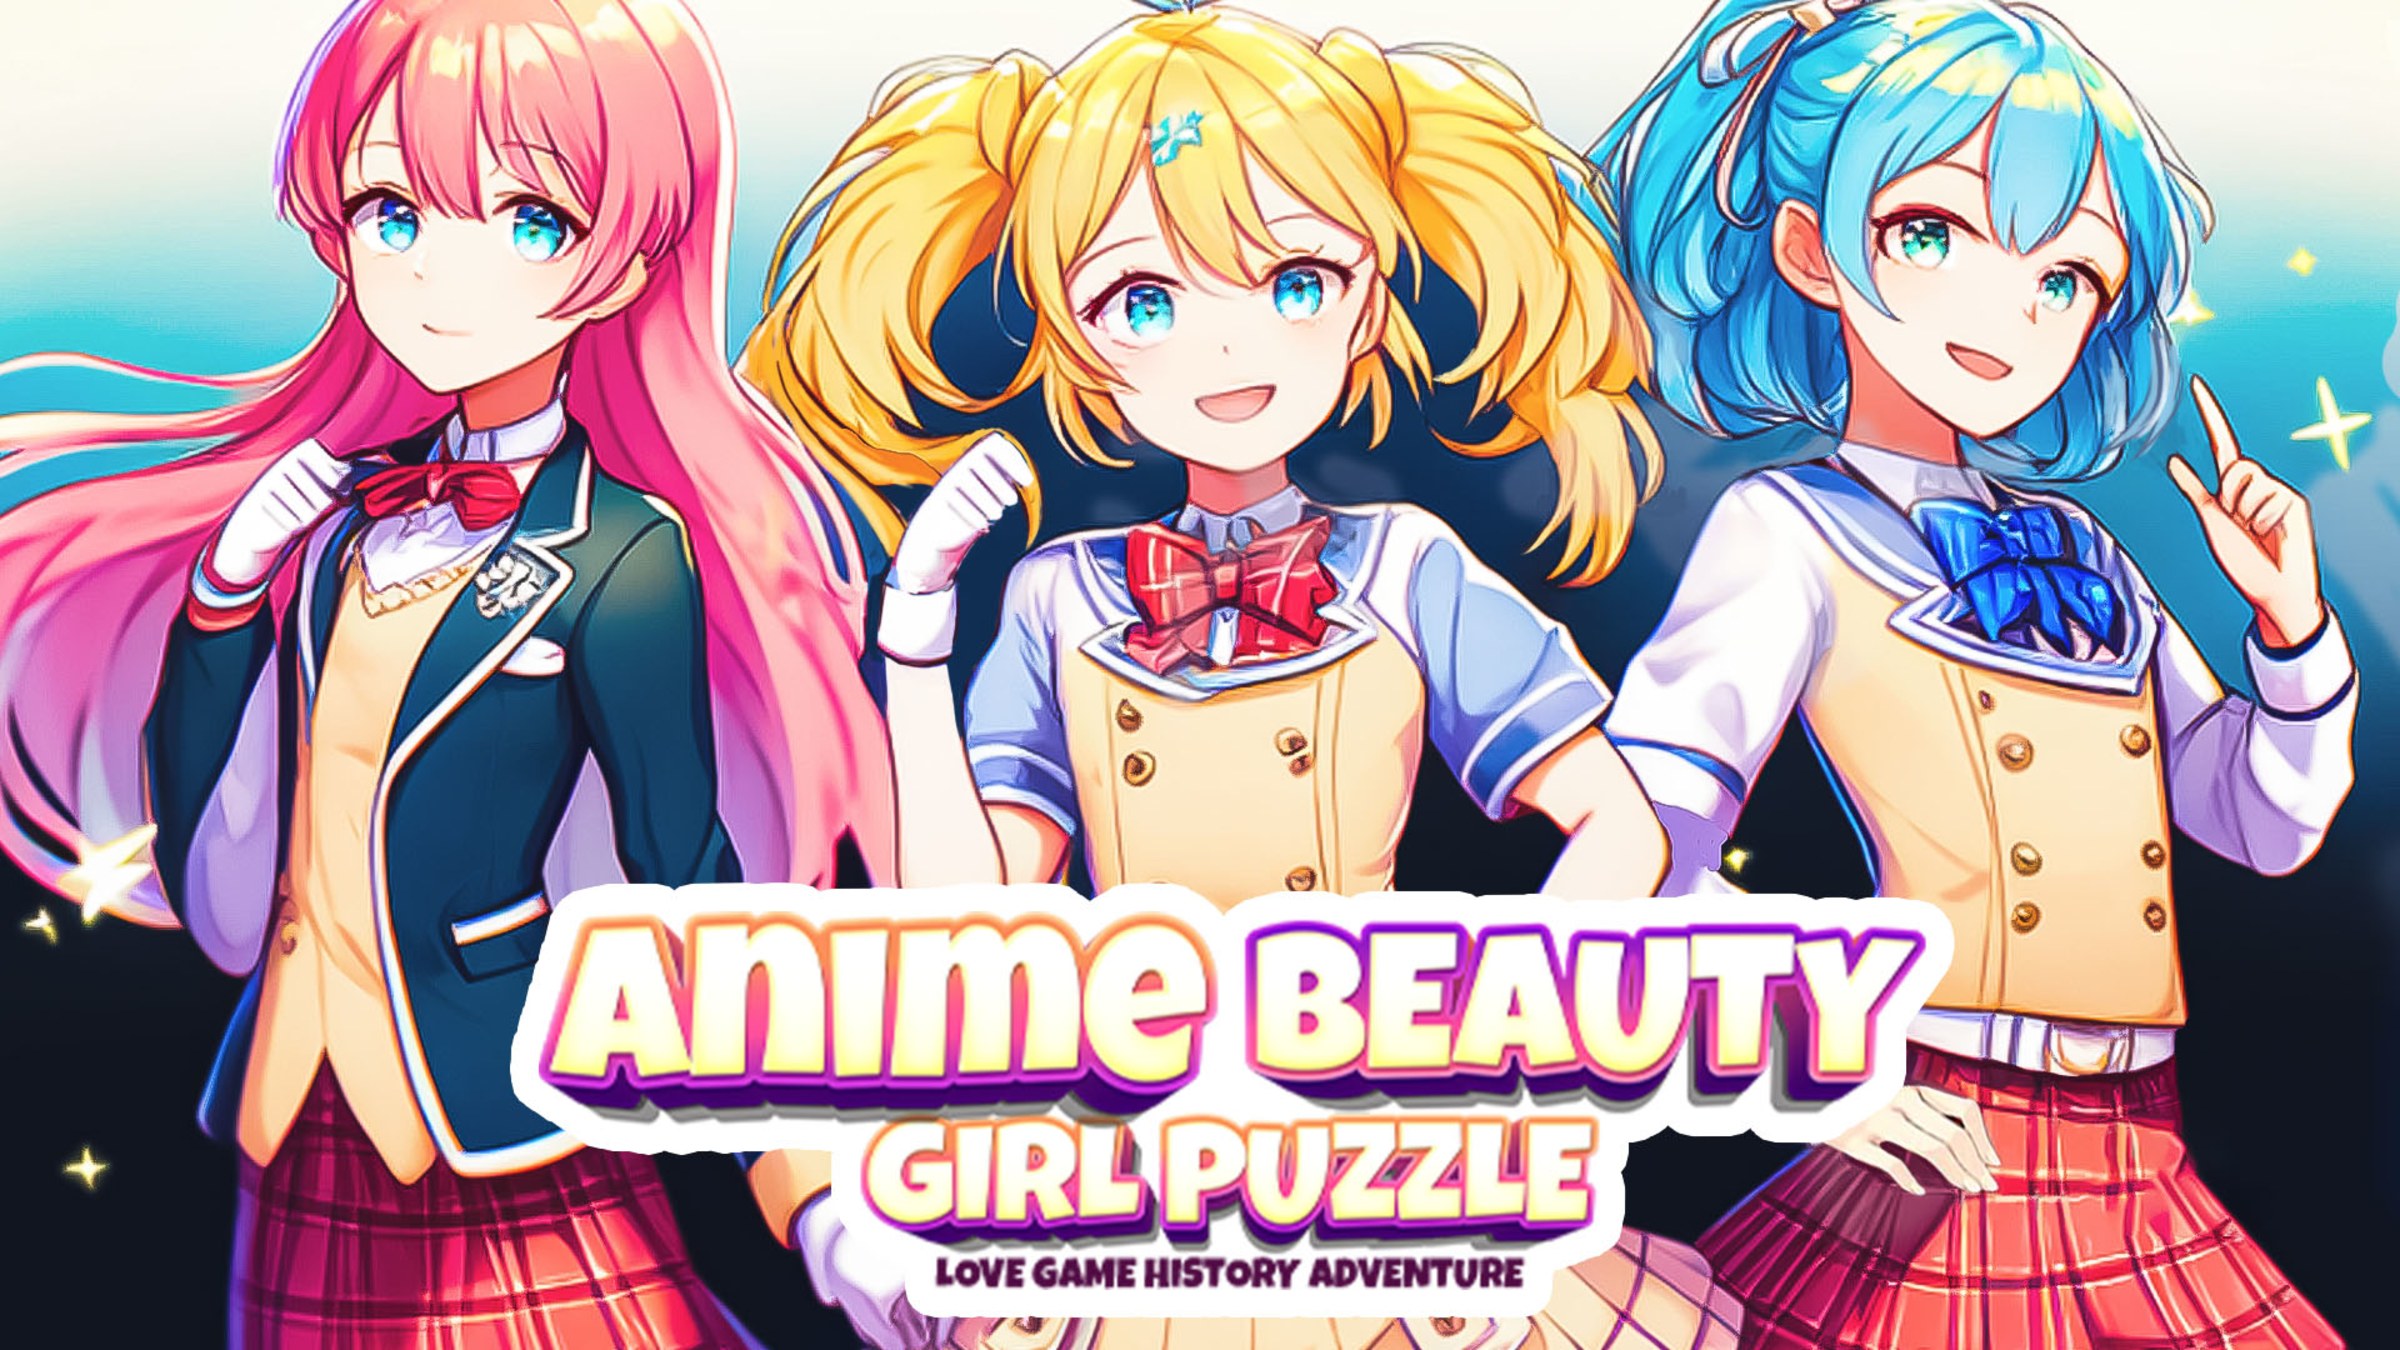 Anime Beauty Girl Puzzle - Love Game History Adventure for